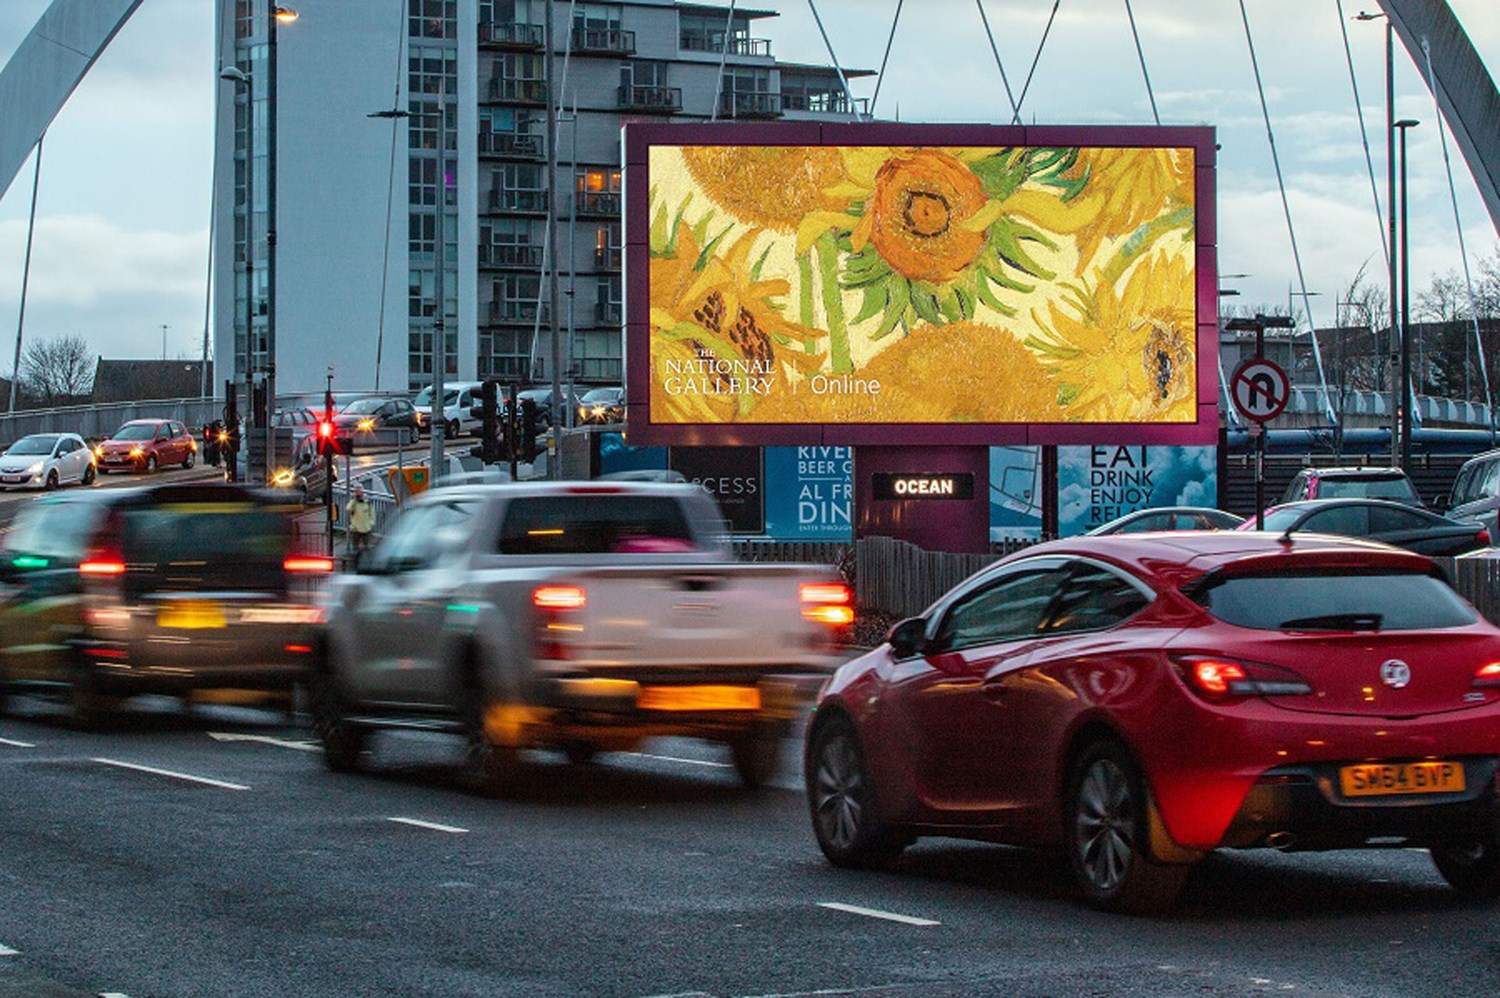 Works from London's National Gallery hit Britain's streets, 